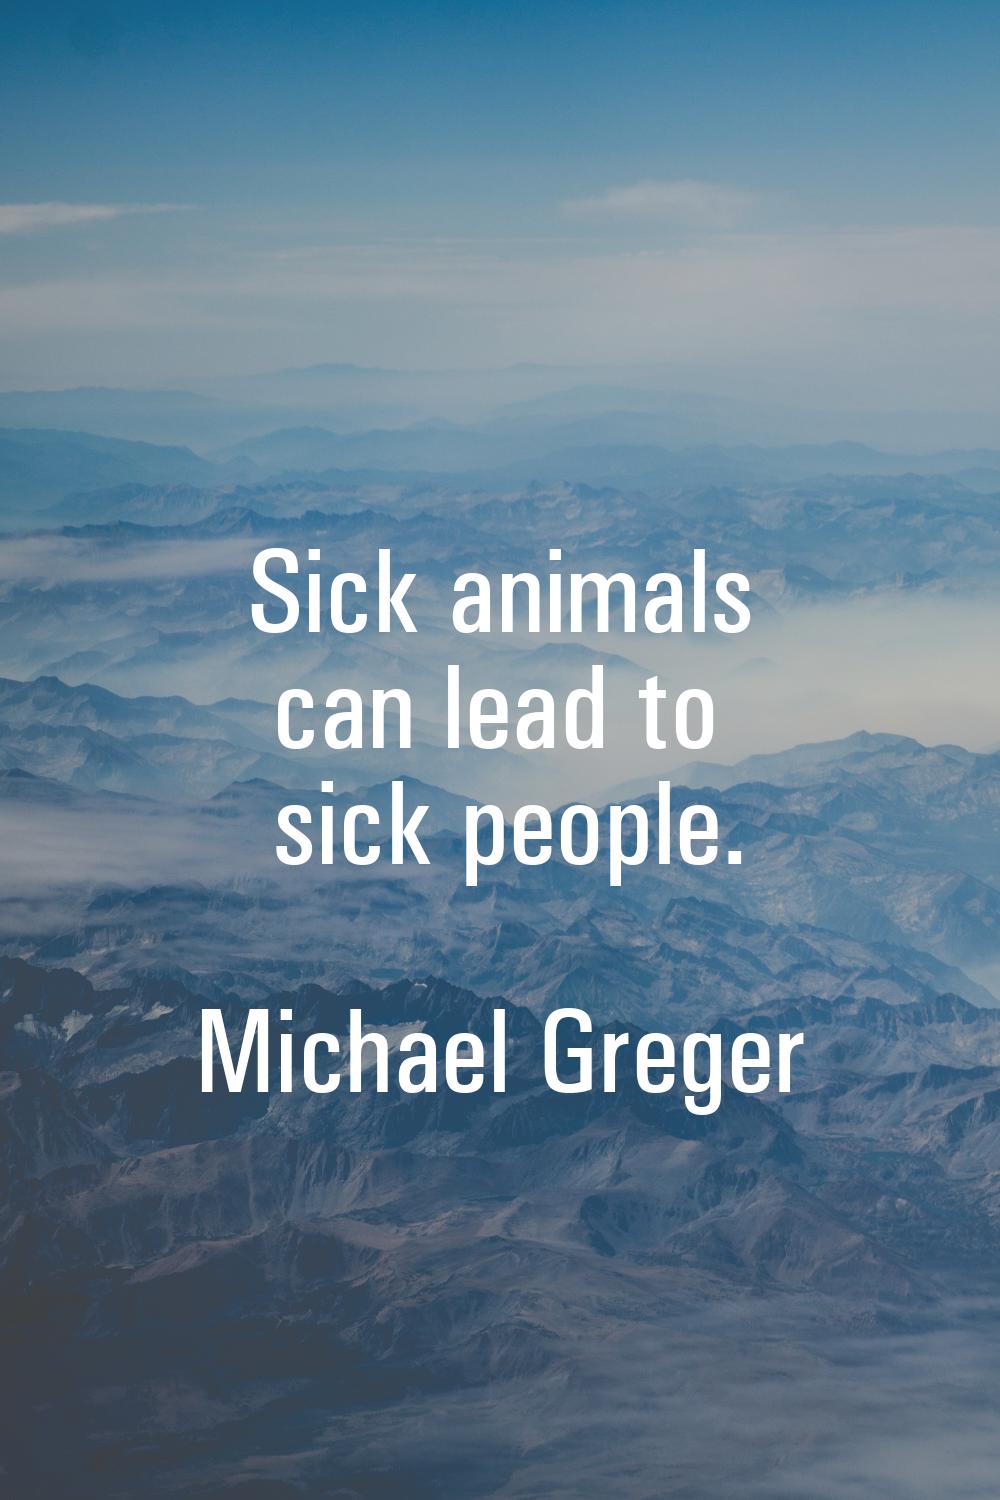 Sick animals can lead to sick people.